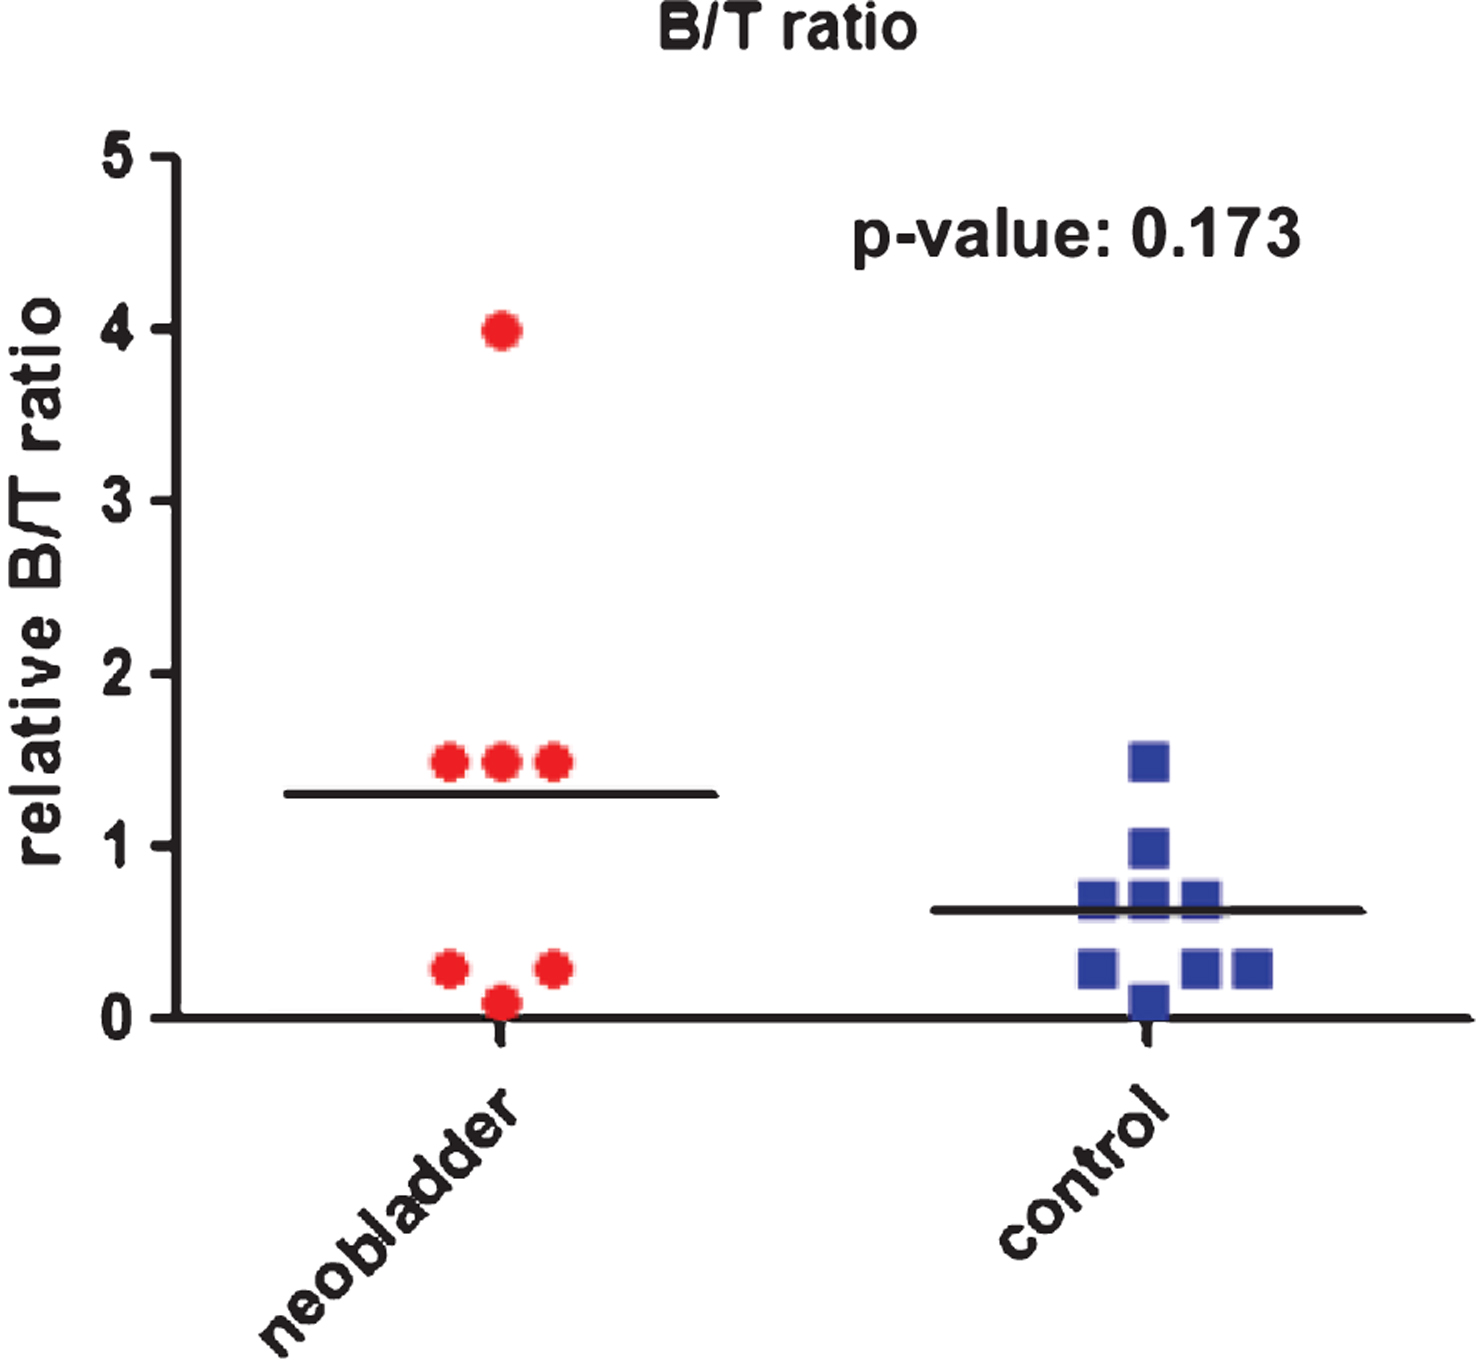 Comparison of B/T cell ratio in urethral biopsies of neobladder and control patients.